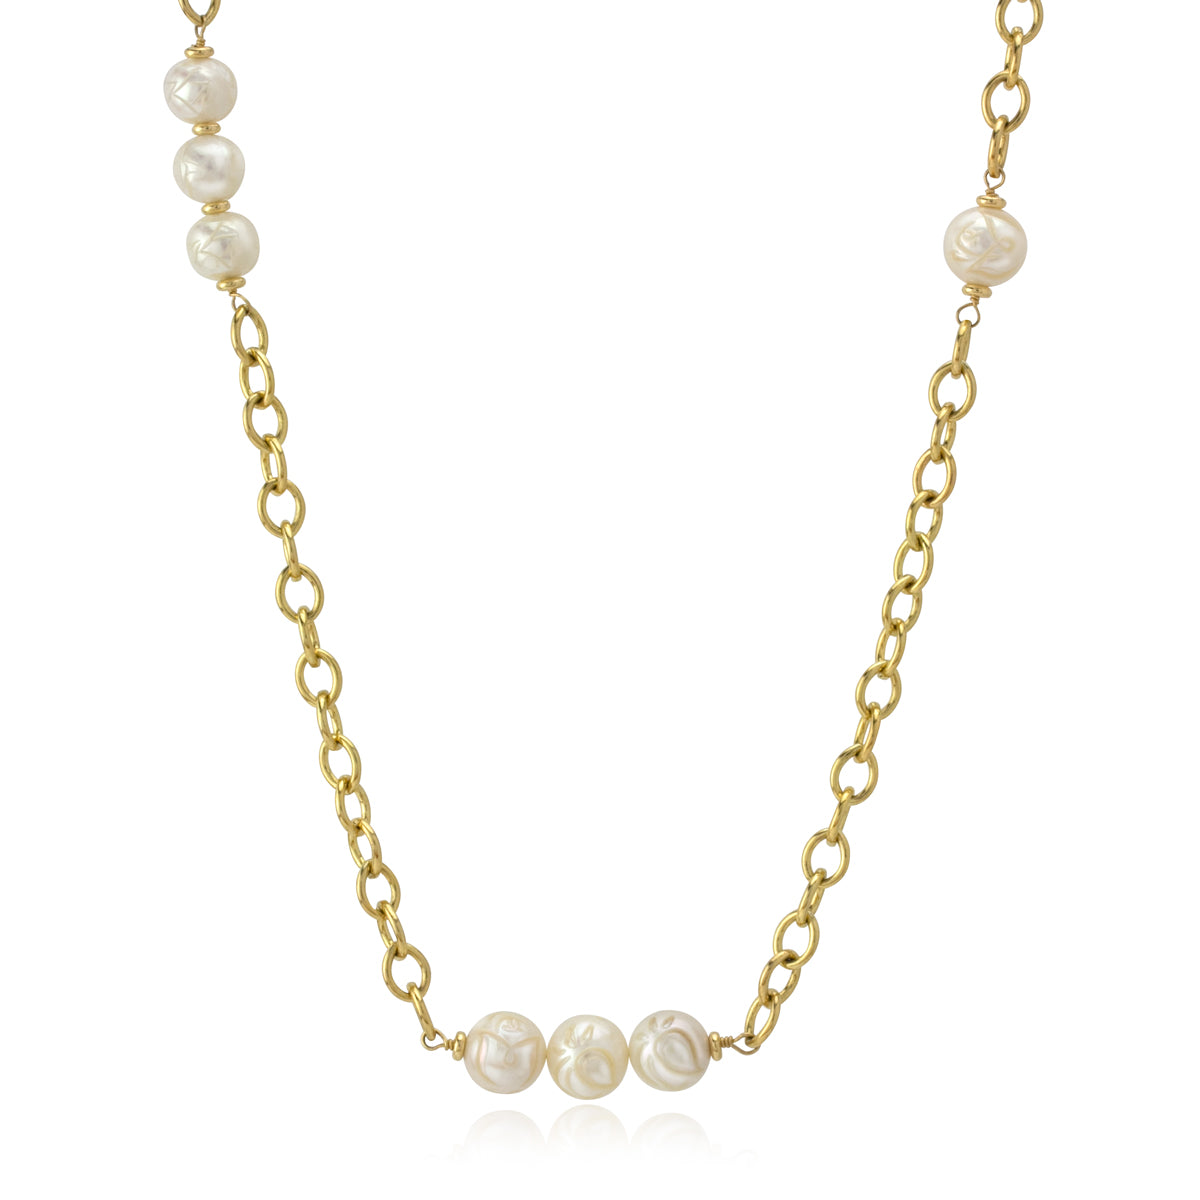 10mm Hand Carved Pearl Necklace